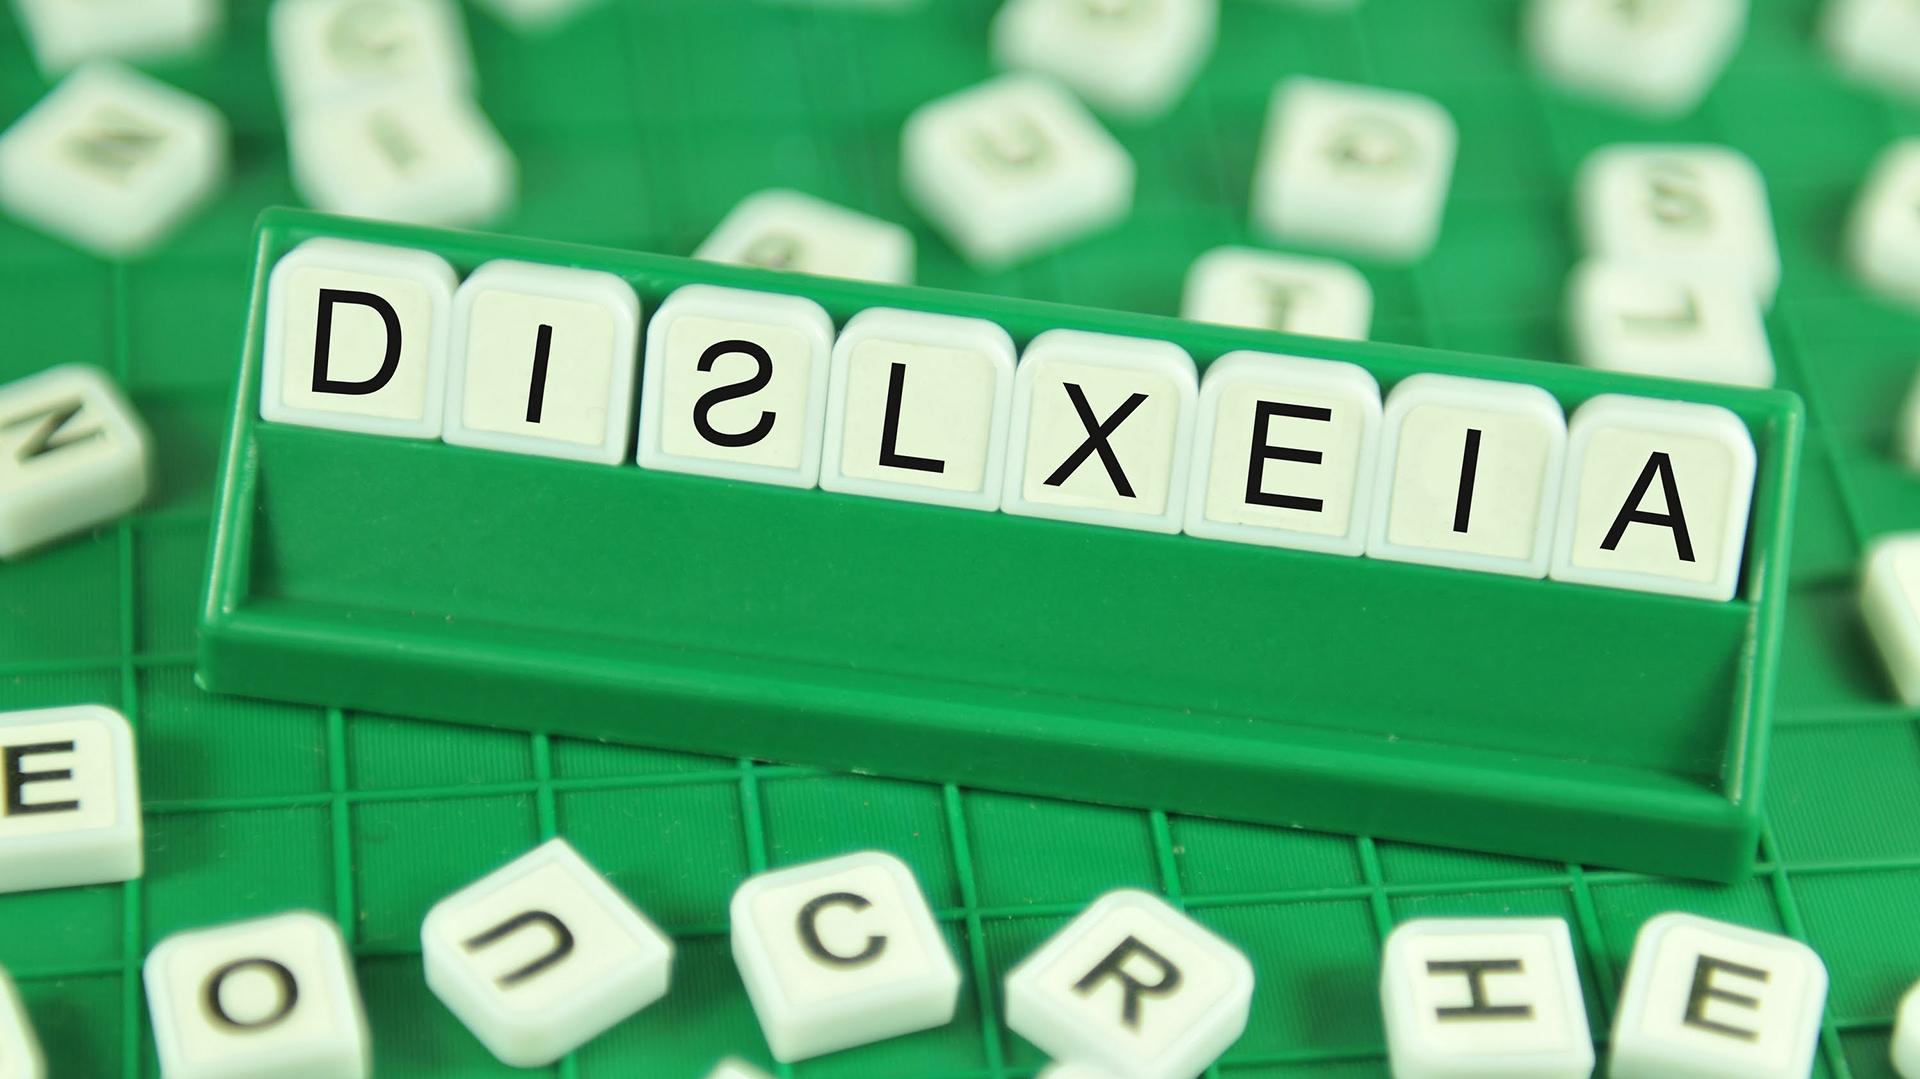 Dyslexia is persistent throughout the person's life